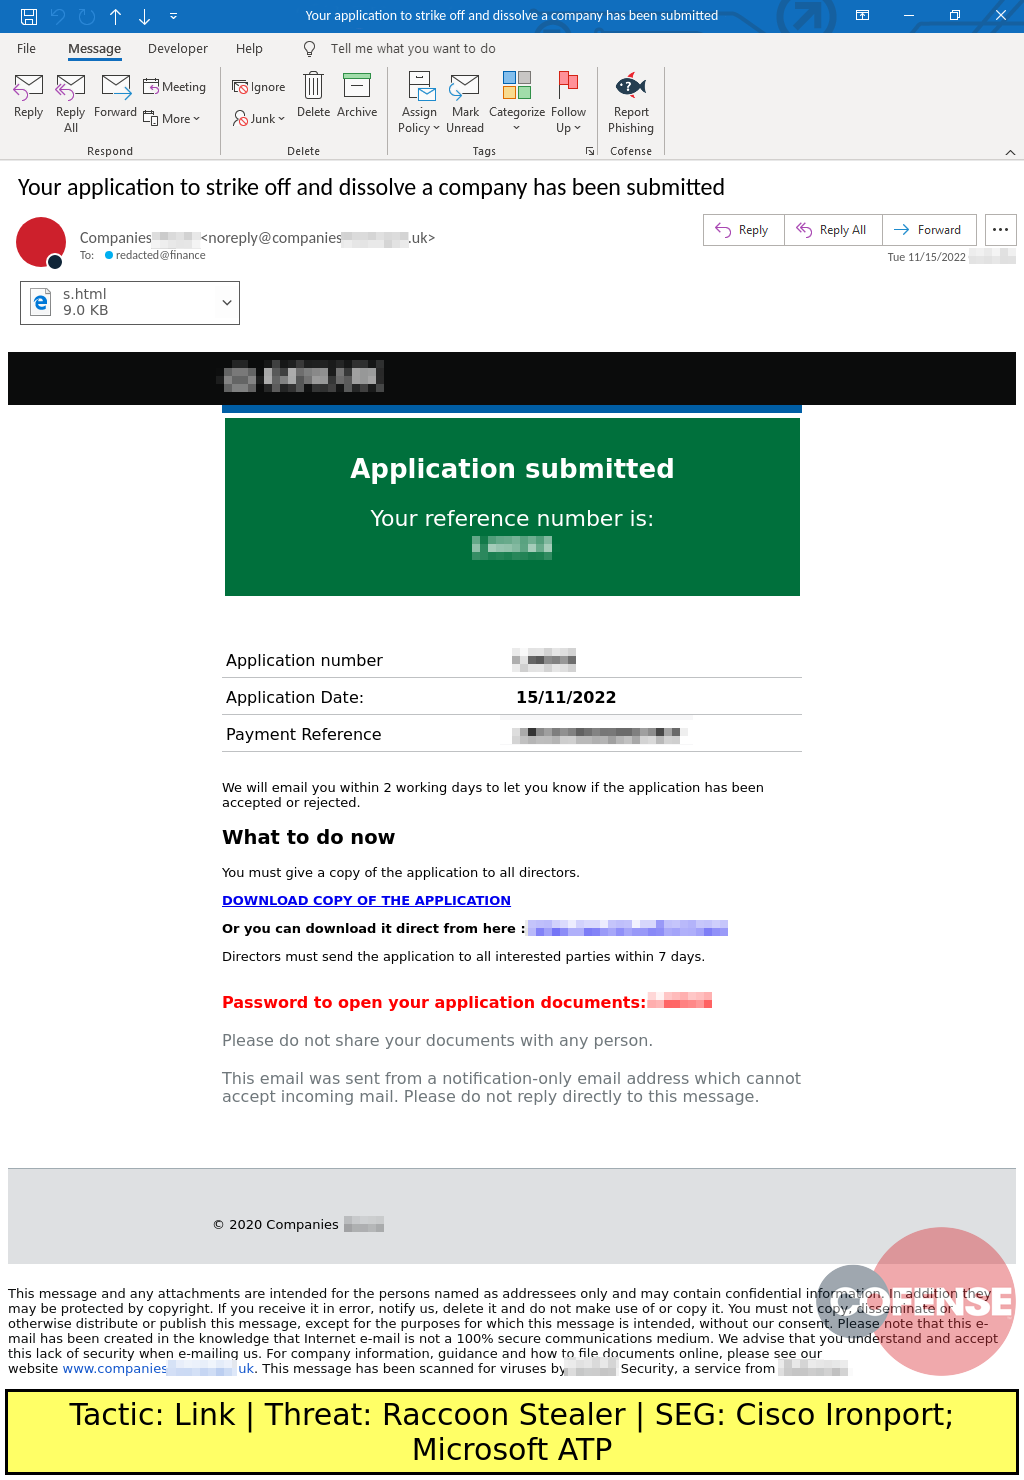 Real Phishing Example: UK Companies House-spoofing emails found in environments protected by Cisco Ironport and Microsoft ATP deliver Raccoon Stealer via links embedded in an attached HTML file and in the email.